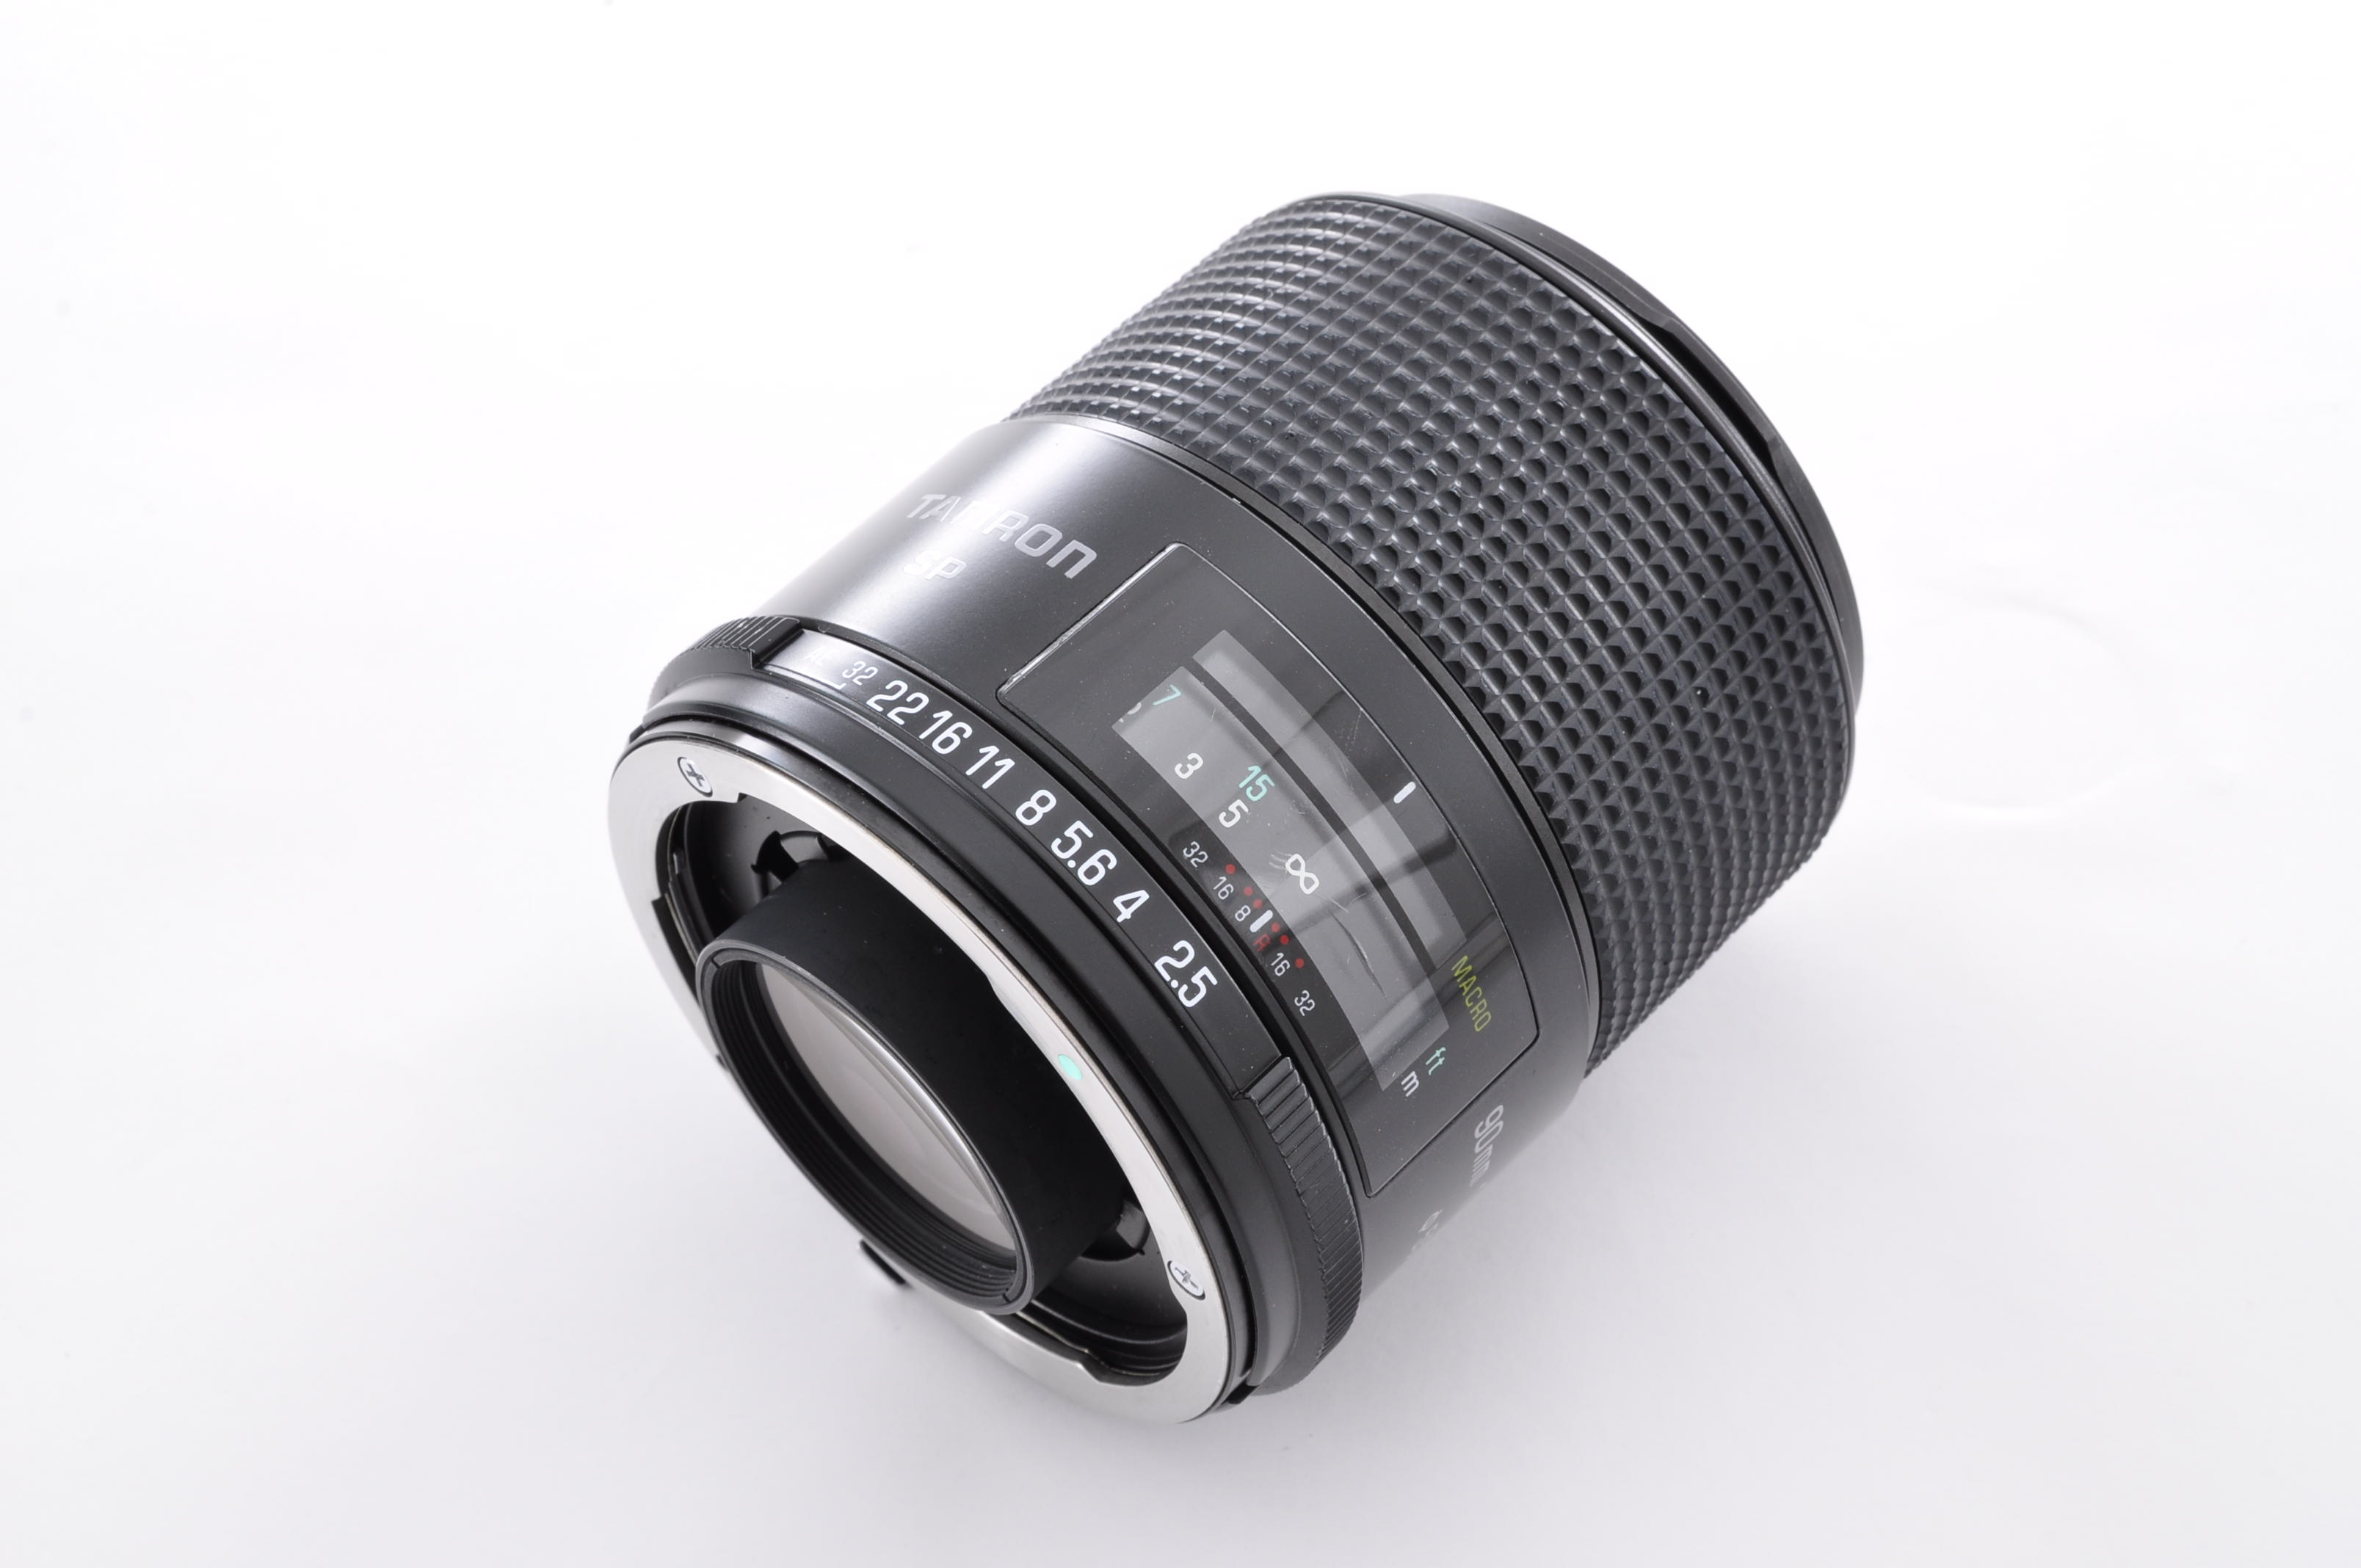 Tamron SP 90mm F/2.5 MF Macro Lens For Olympus OM Mount [Near Mint-] From Japan img02